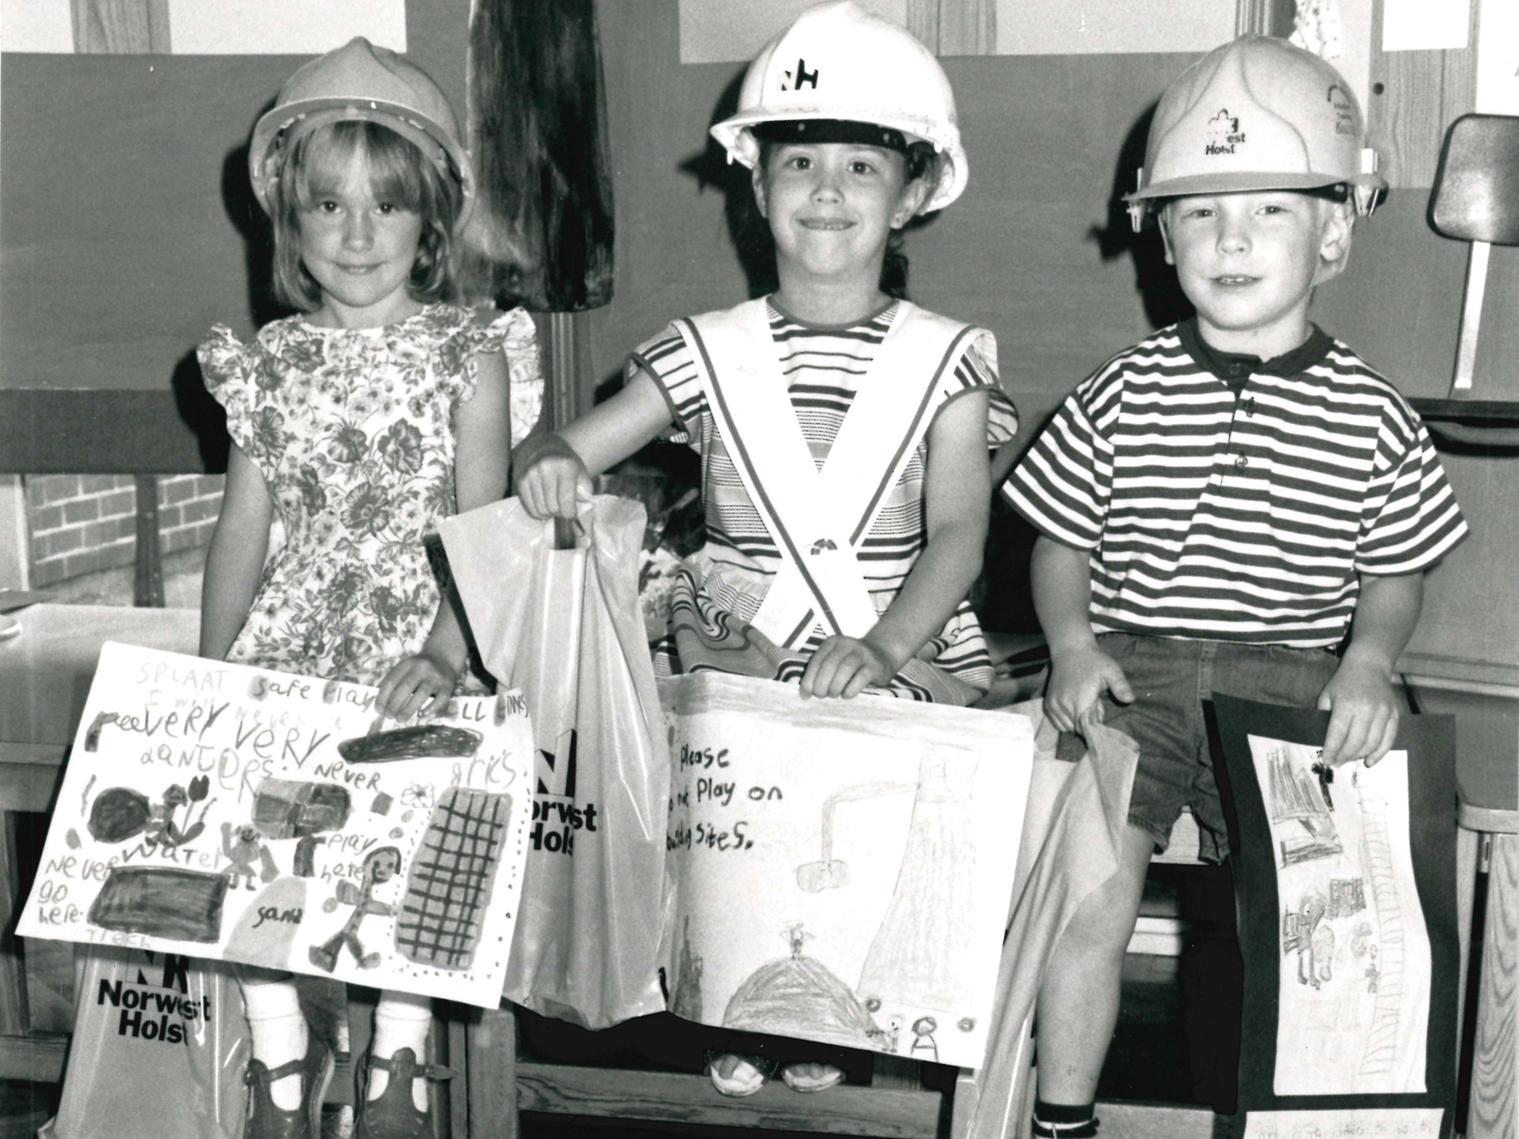 Wrenthorpe Infants School hold a poster competition, 1991.